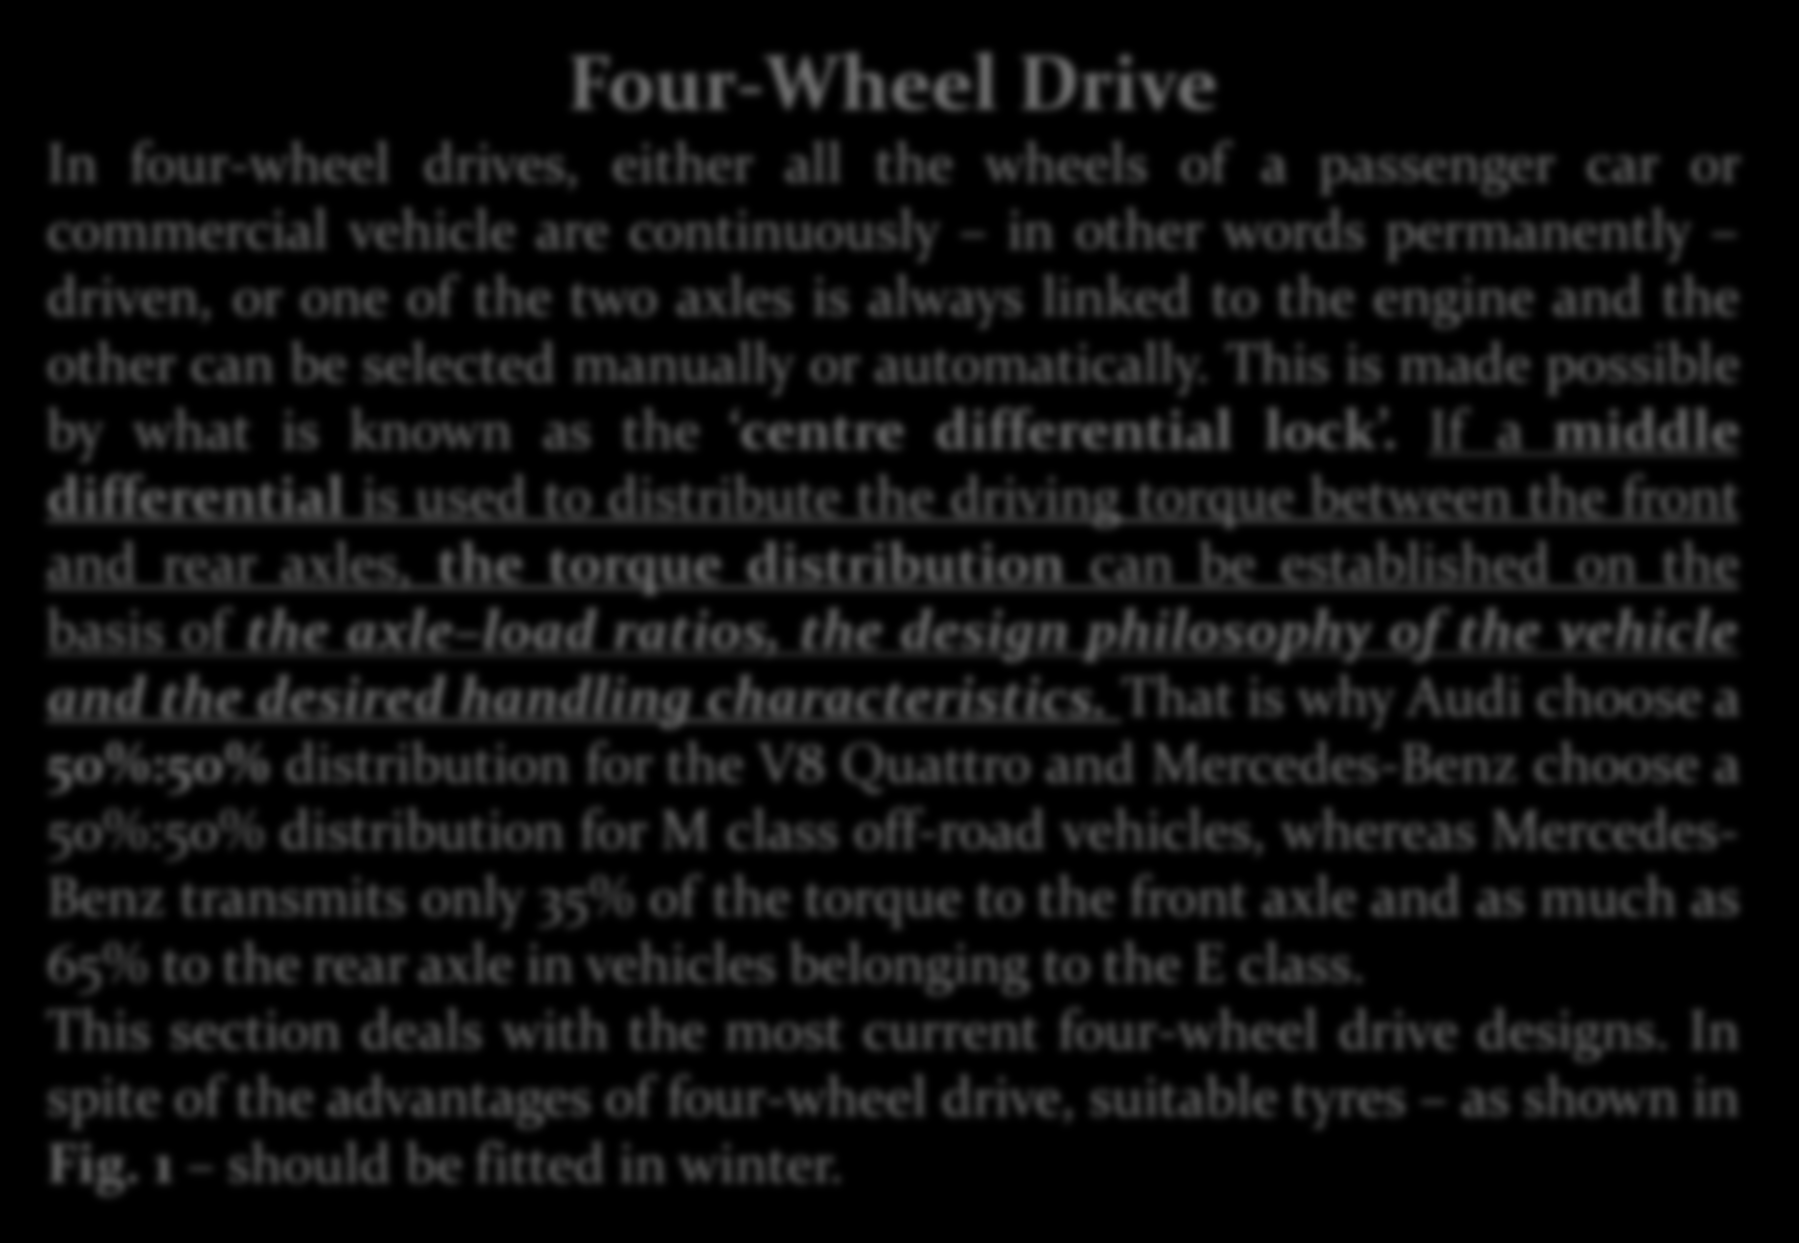 Four-Wheel Drive In four-wheel drives, either all the wheels of a passenger car or commercial vehicle are continuously in other words permanently driven, or one of the two axles is always linked to